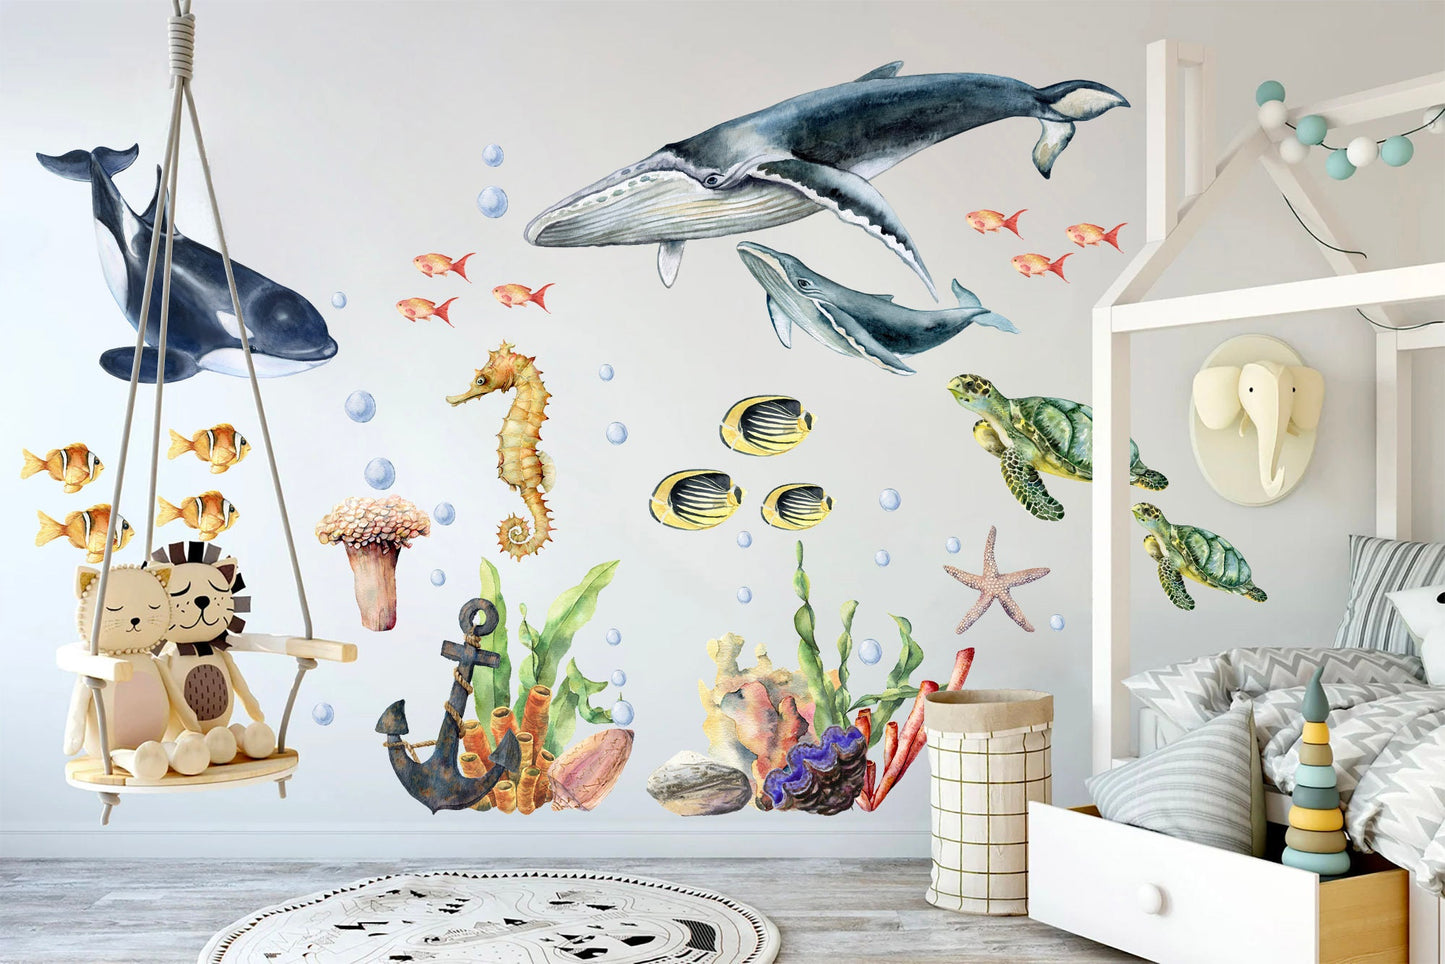 Marine Life Underwater Wall Decal - Whale Dolphin Sea Turtle Seahorse - Removable Peel and Stick - BR145